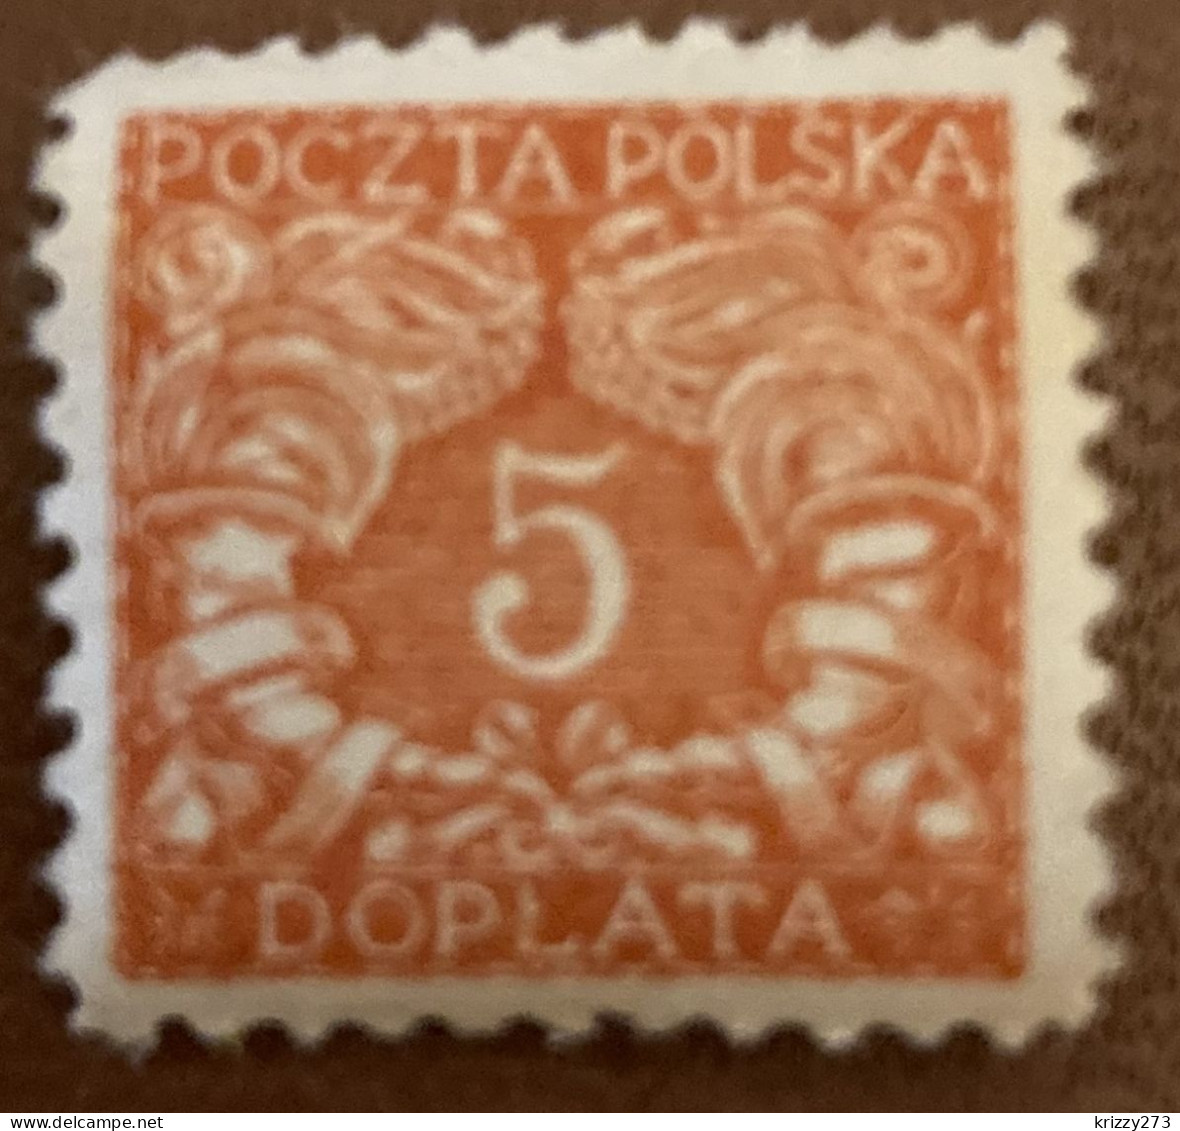 Poland 1919 Postage Due South Poland 5 F - Used - Postage Due